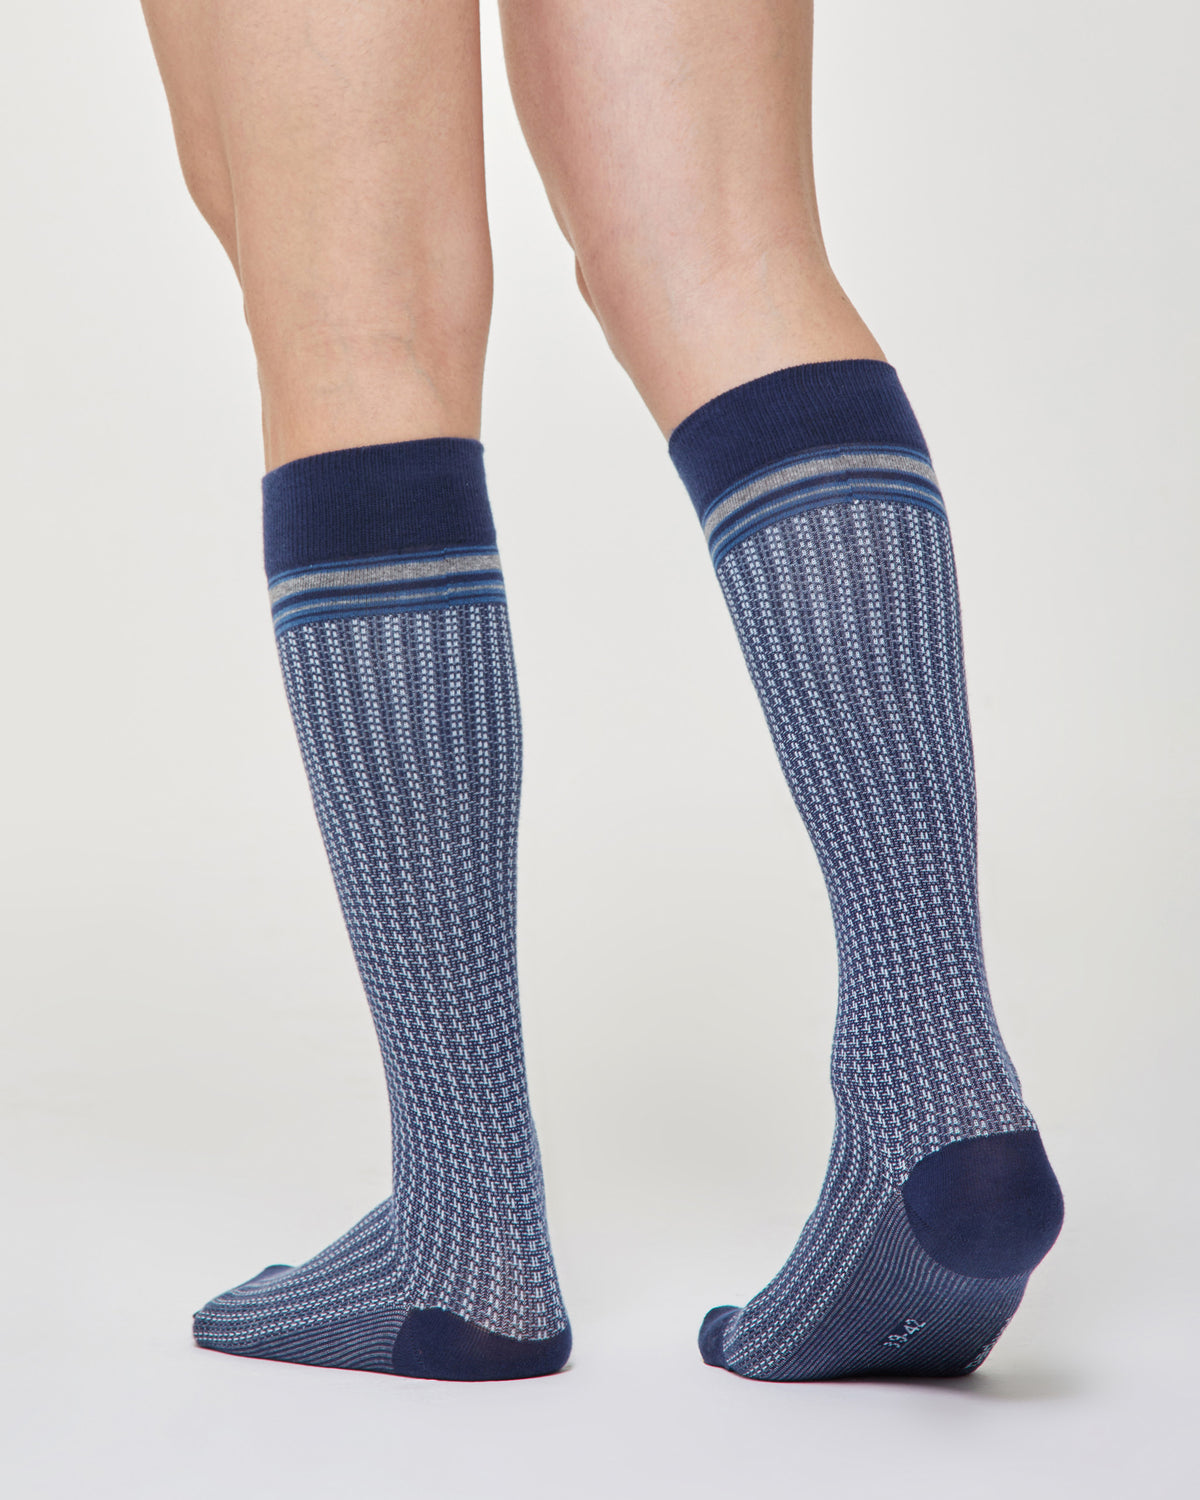 Efrem cotton long sock with tie pattern